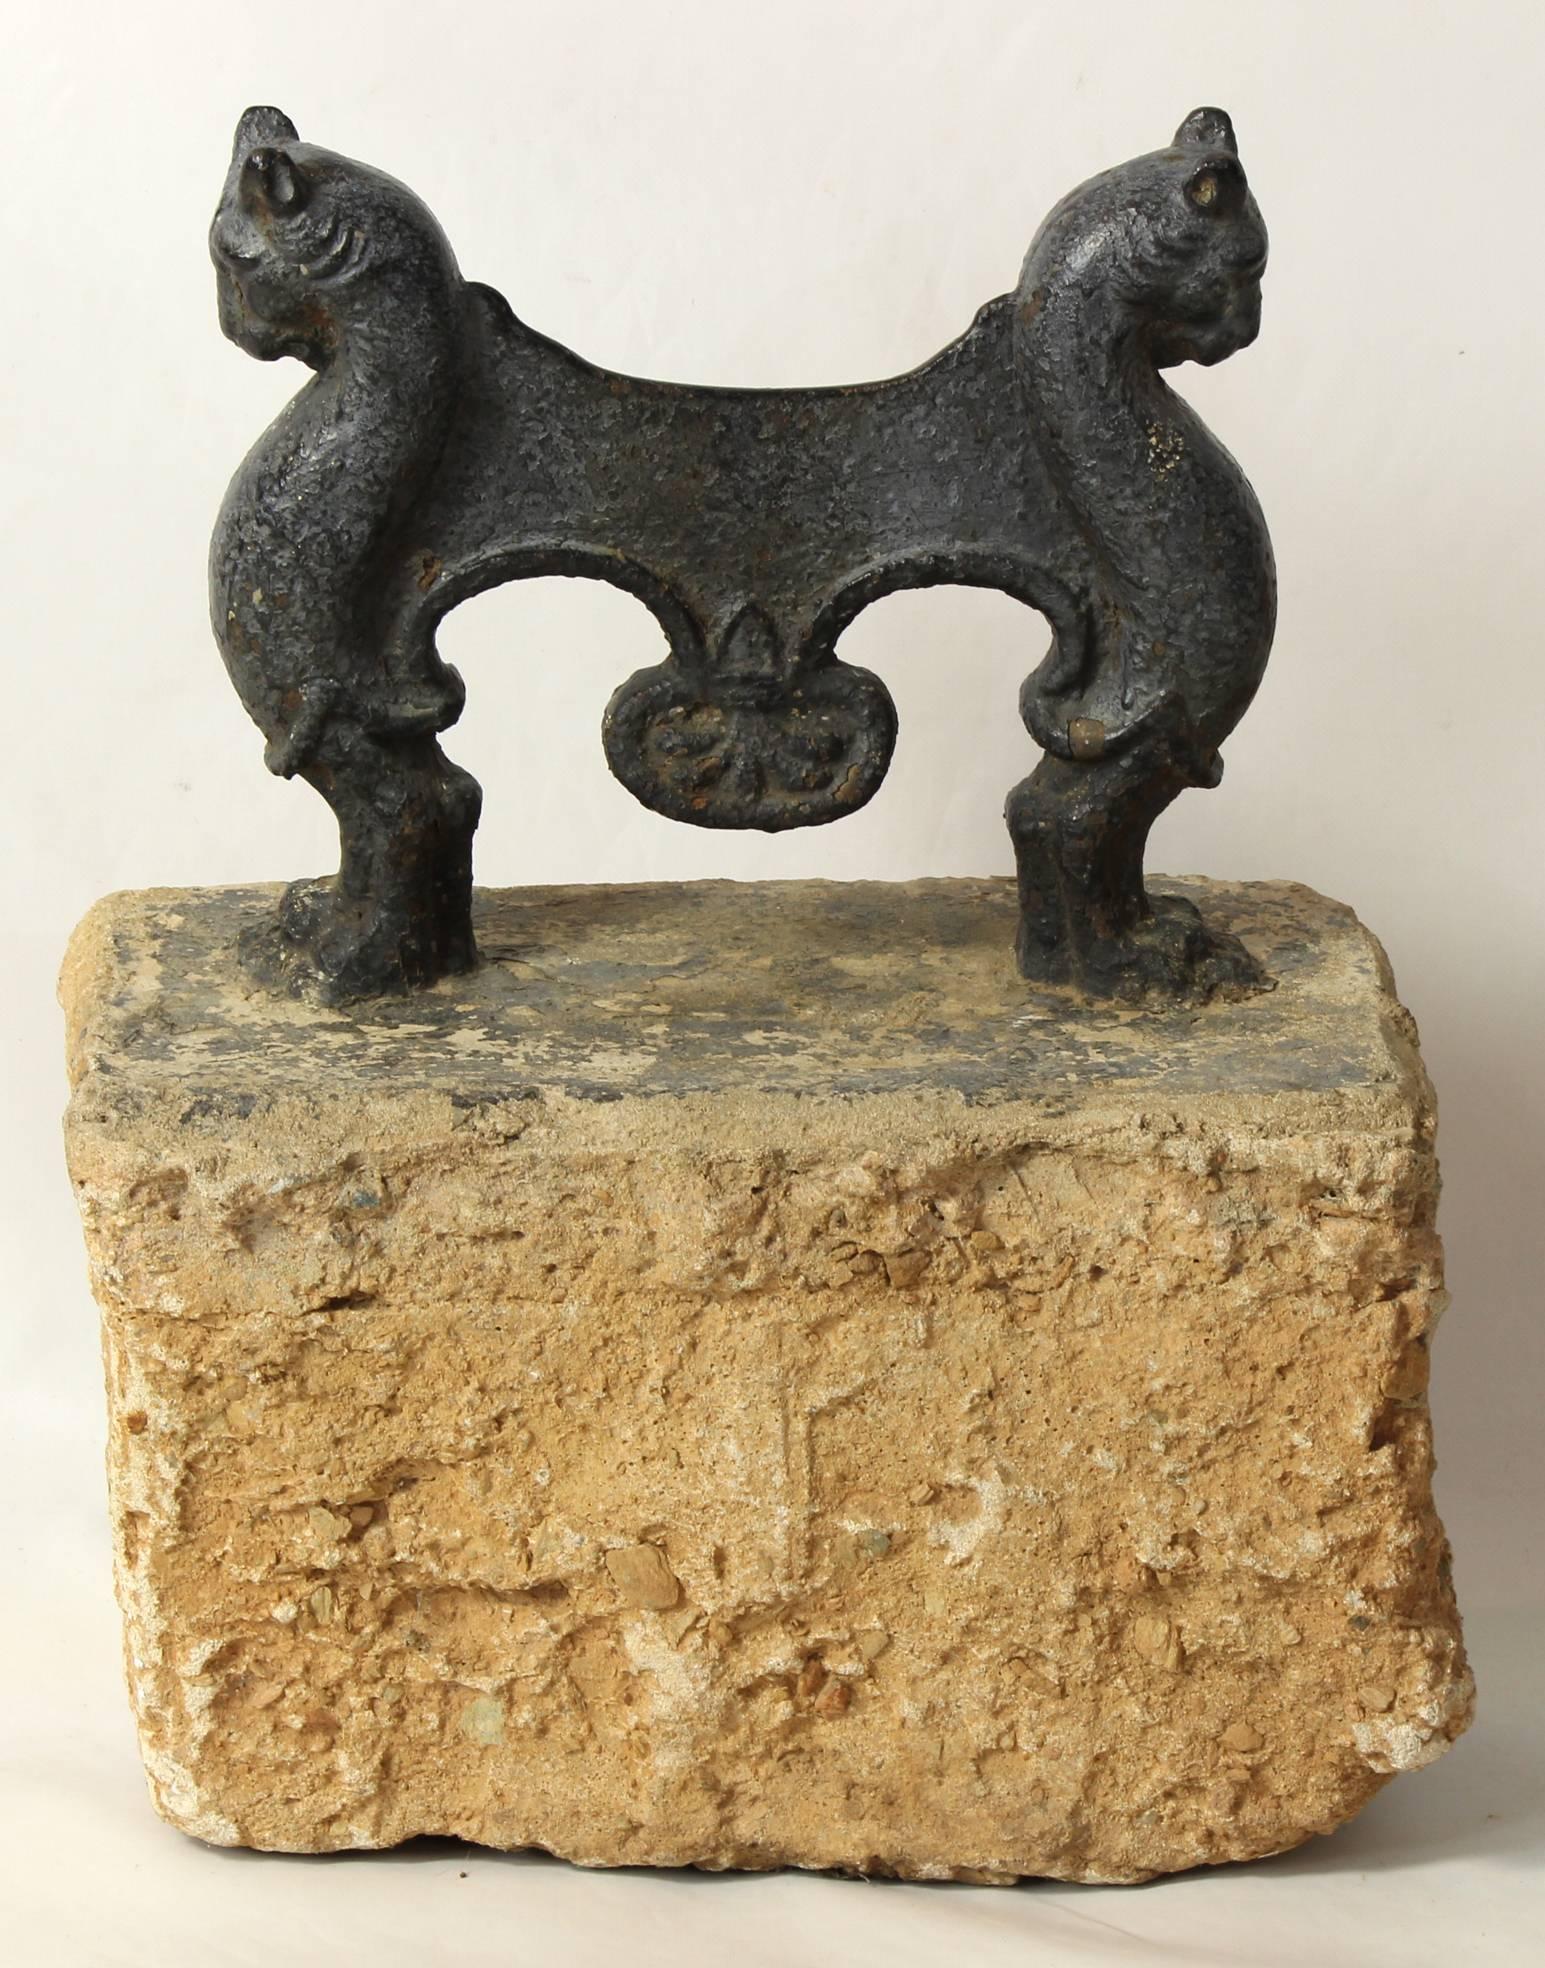 A large and impressive early 19th century English cast iron boot scrape in the form of lions.